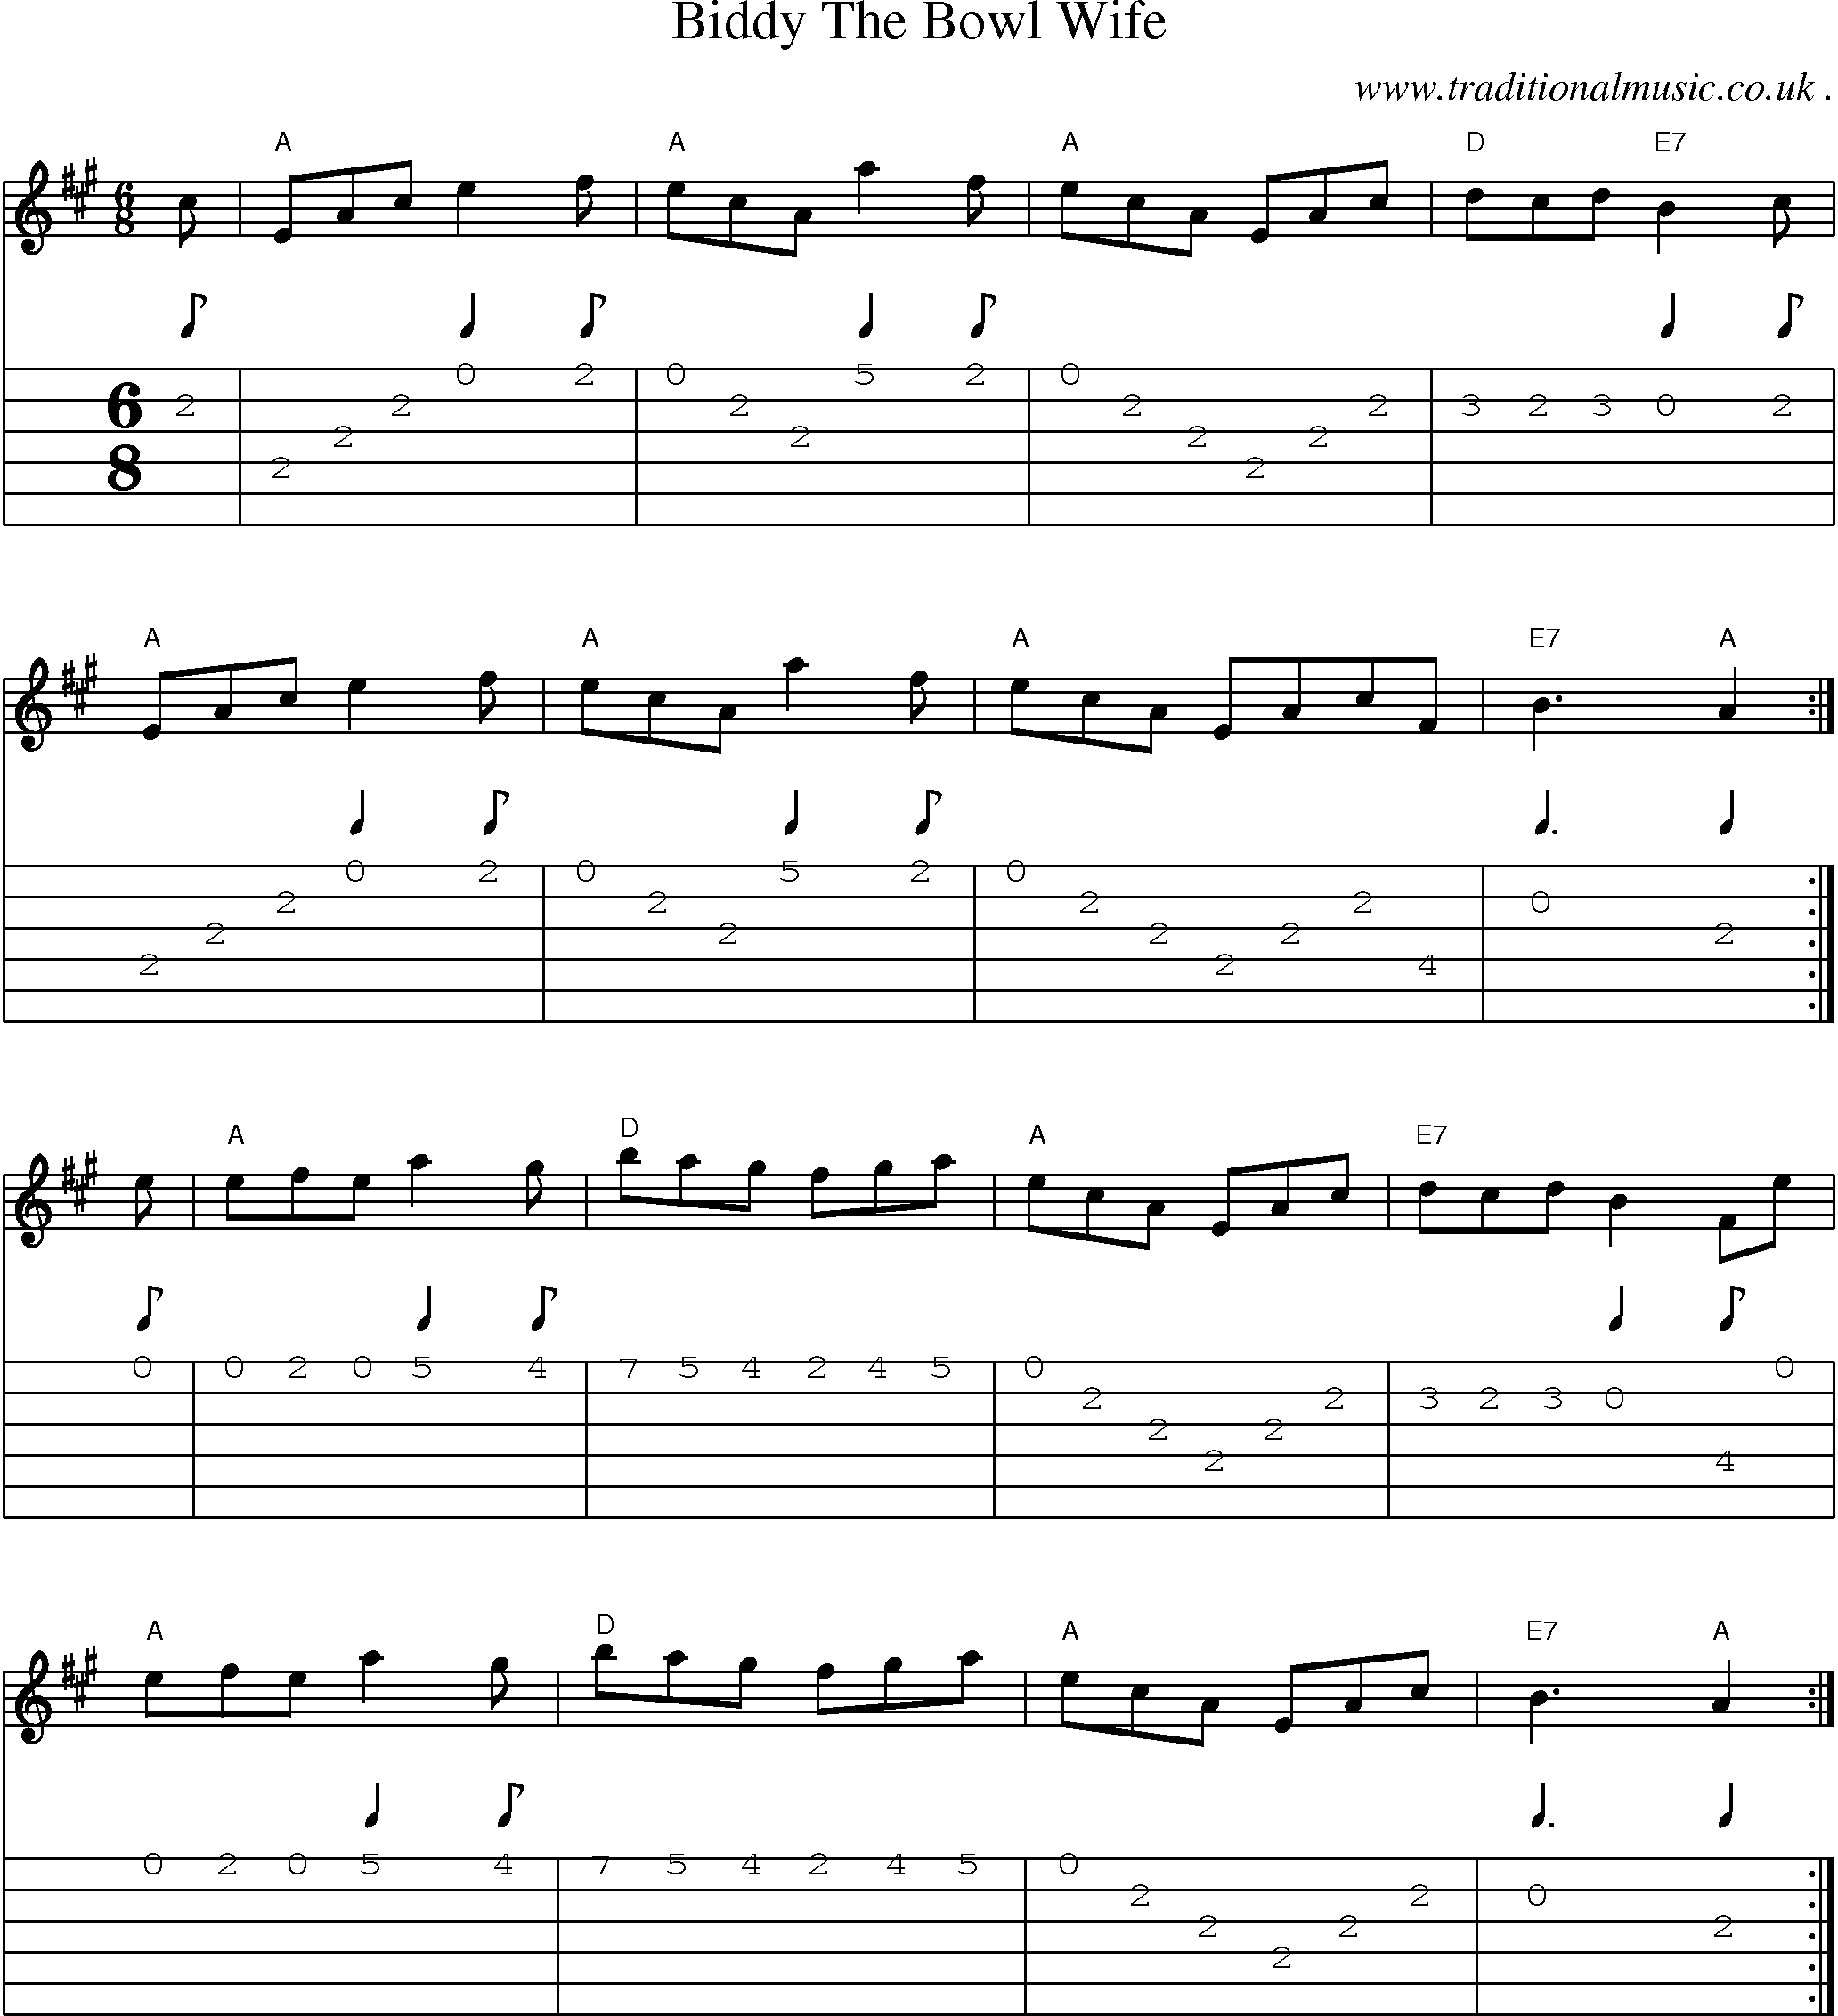 Sheet-Music and Guitar Tabs for Biddy The Bowl Wife